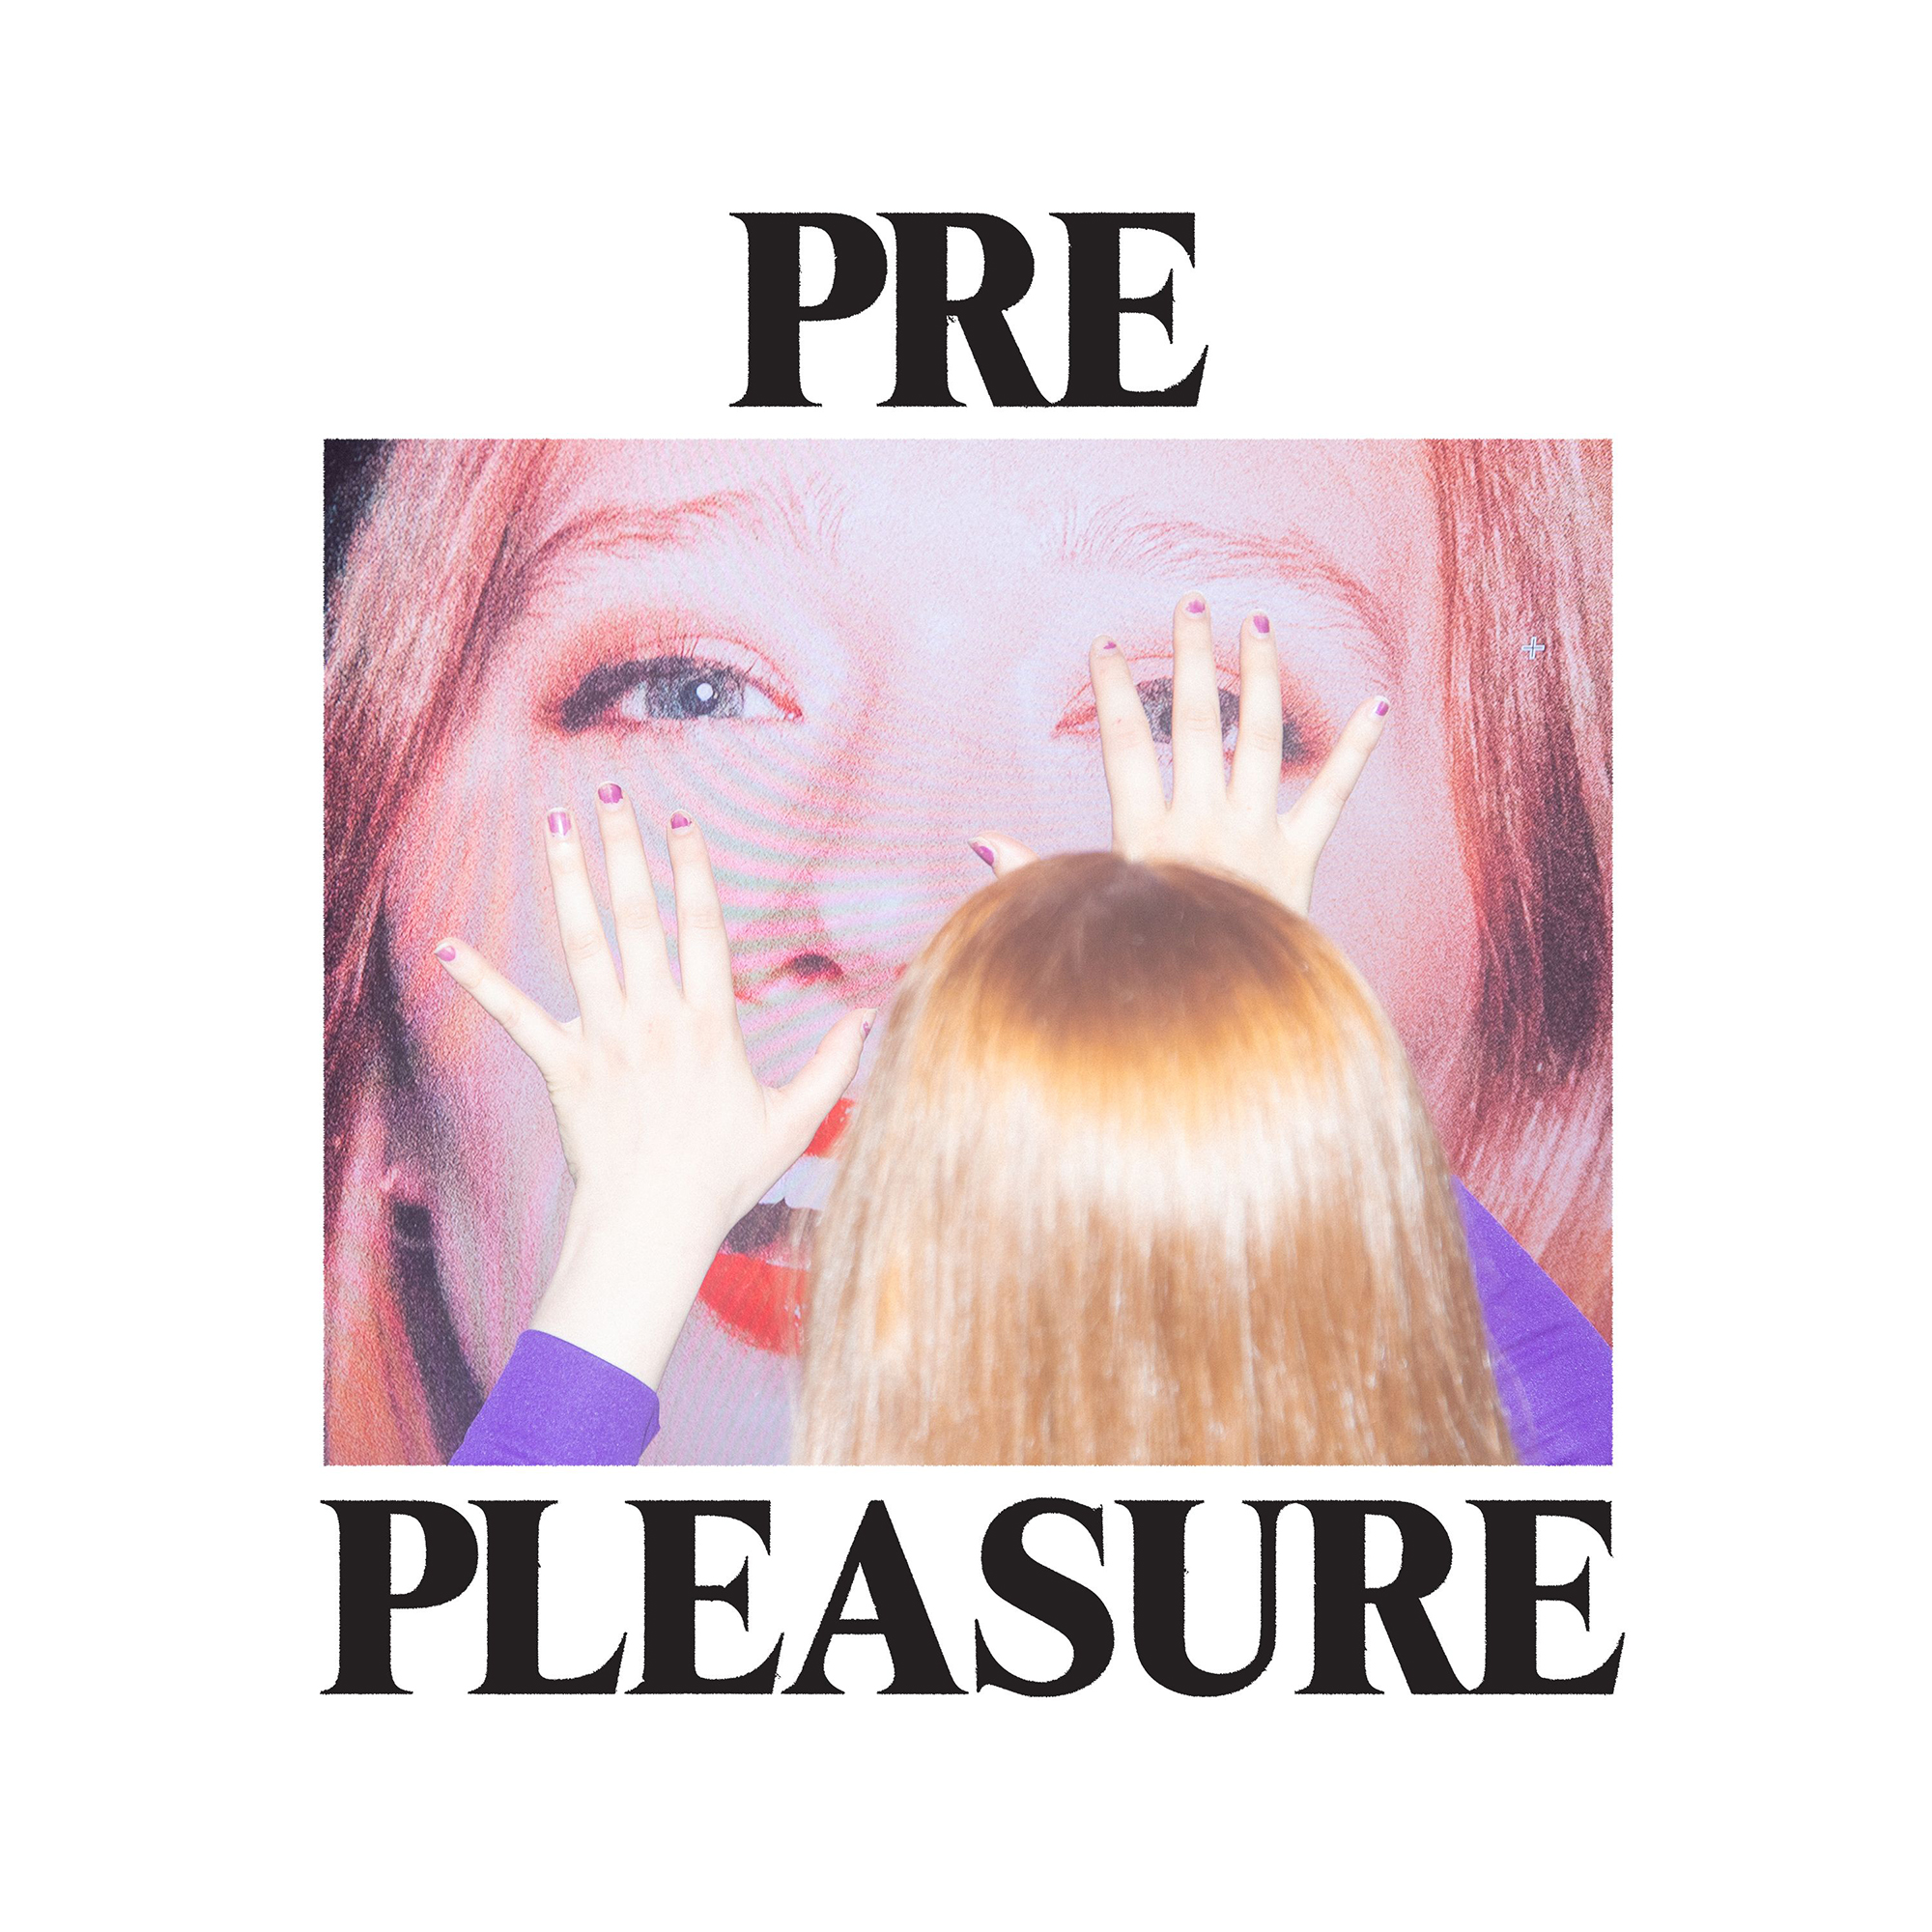 Jaklin Fuck - Julia Jacklin - New album PRE PLEASURE out August 26, 2022. Pre-order now  and stream the first single, \